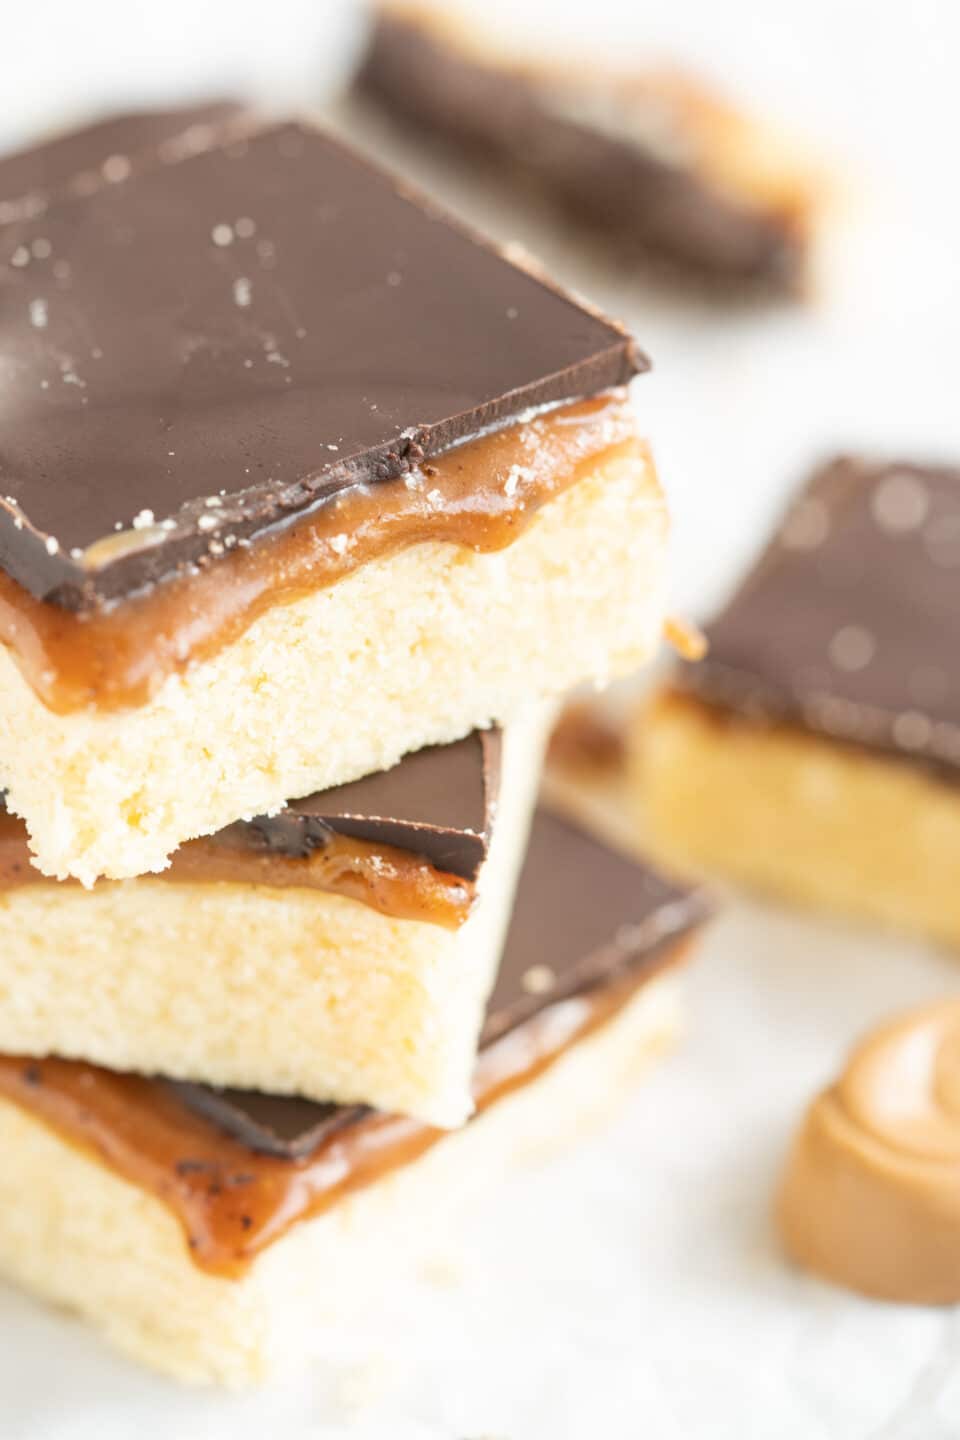 Heavenly Shortbread Recipe with Caramel and Chocolate